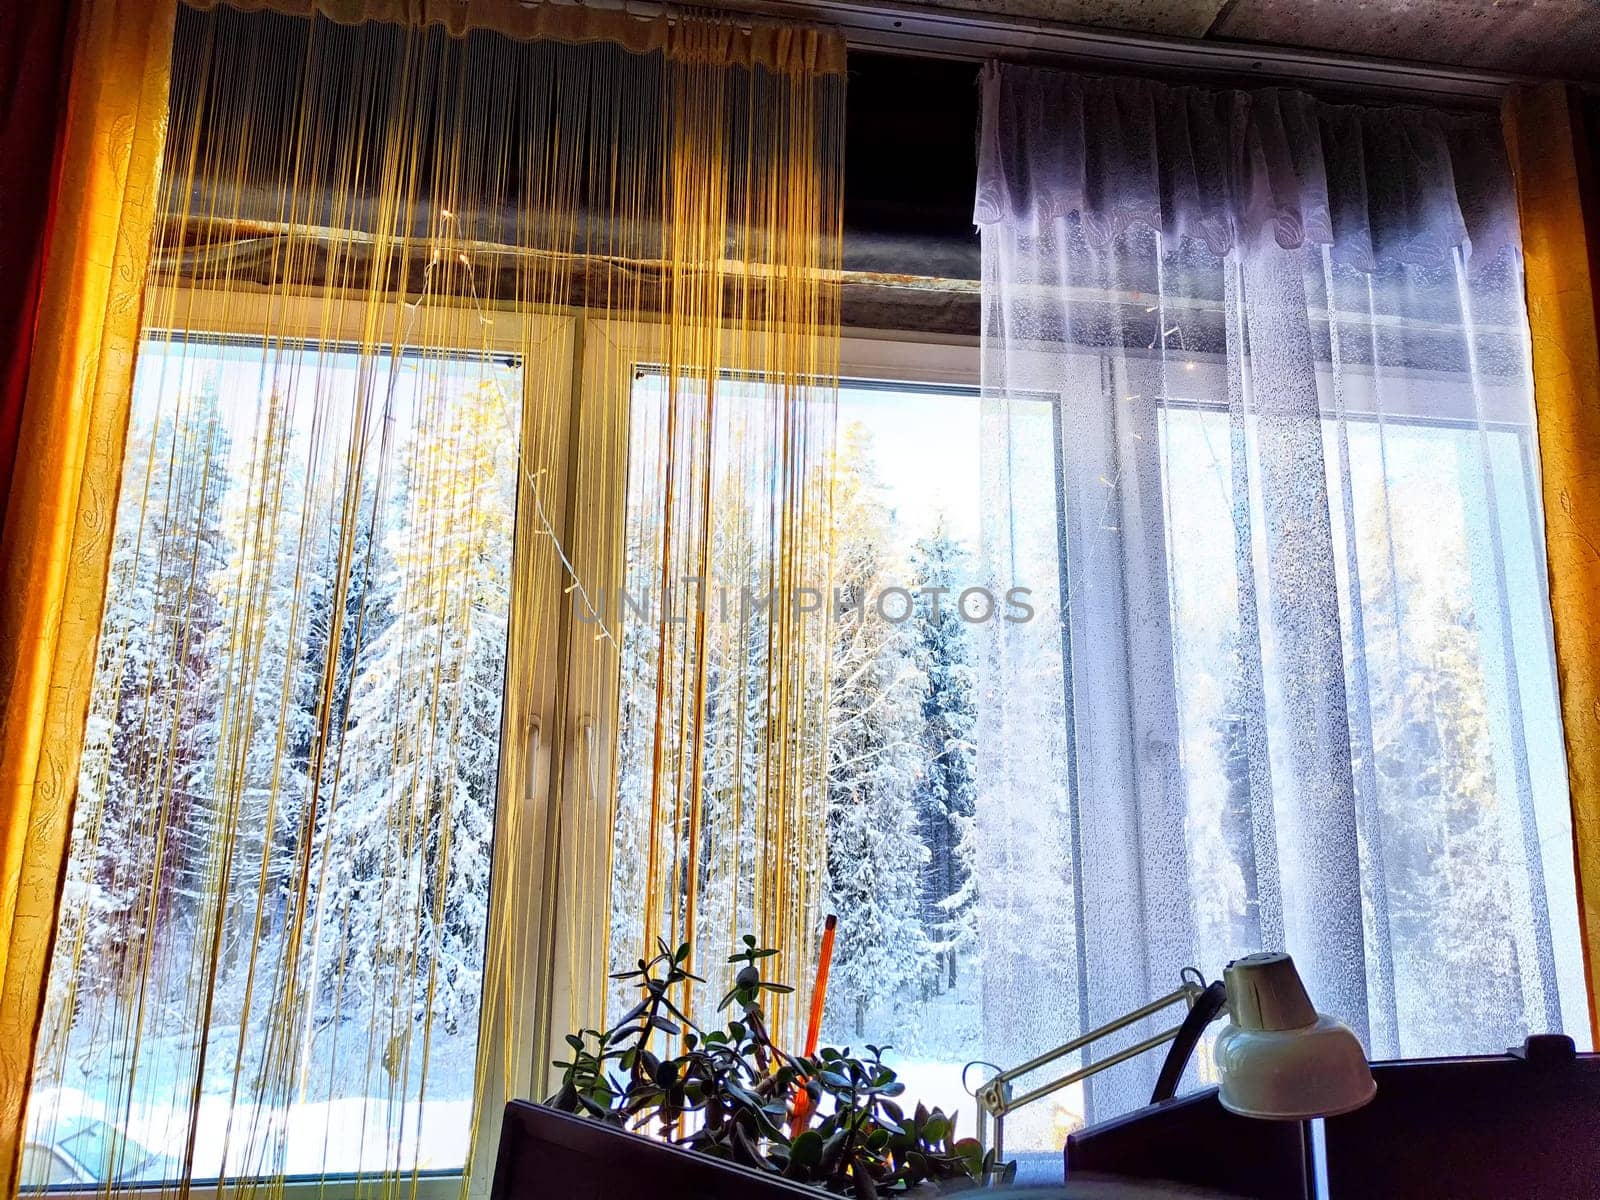 A tranquil view of snow-clad trees and car outside a window with sheer curtains. Winter Wonderland View From a Cozy Room